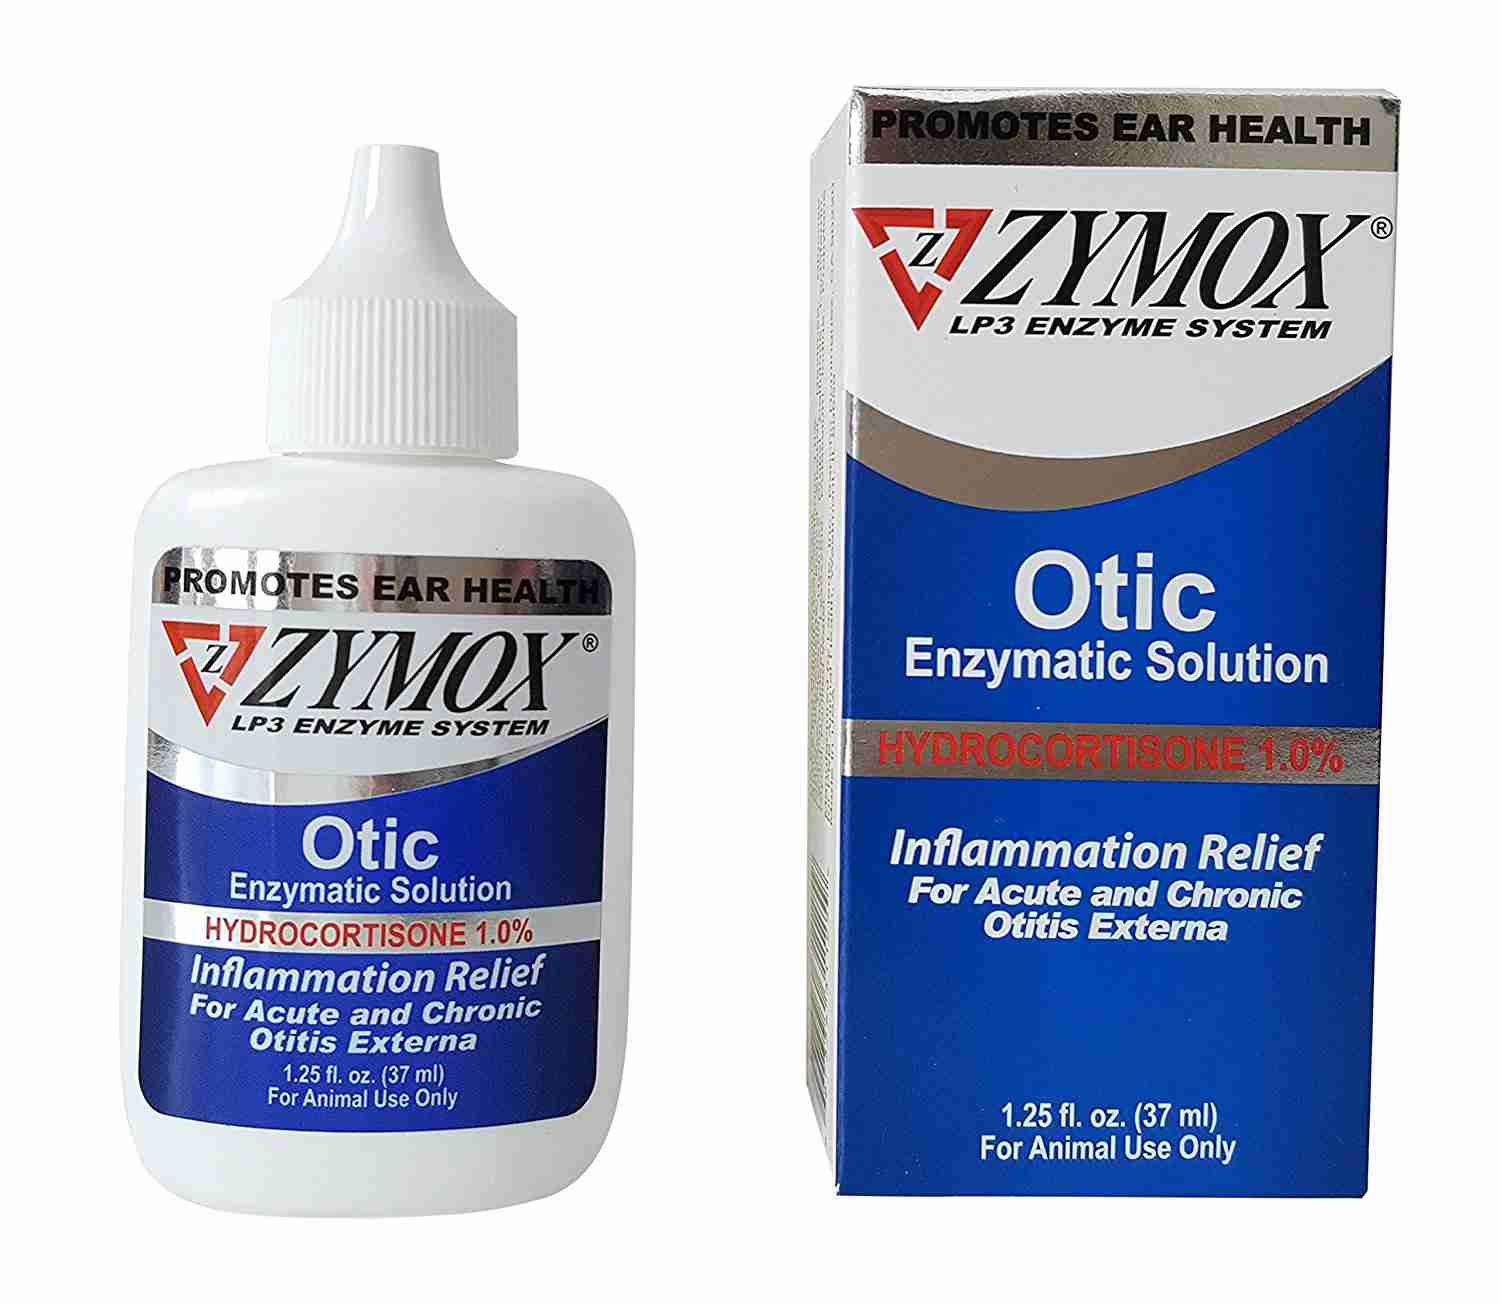 Otic Pet Ear Treatment with Hydrocortisone